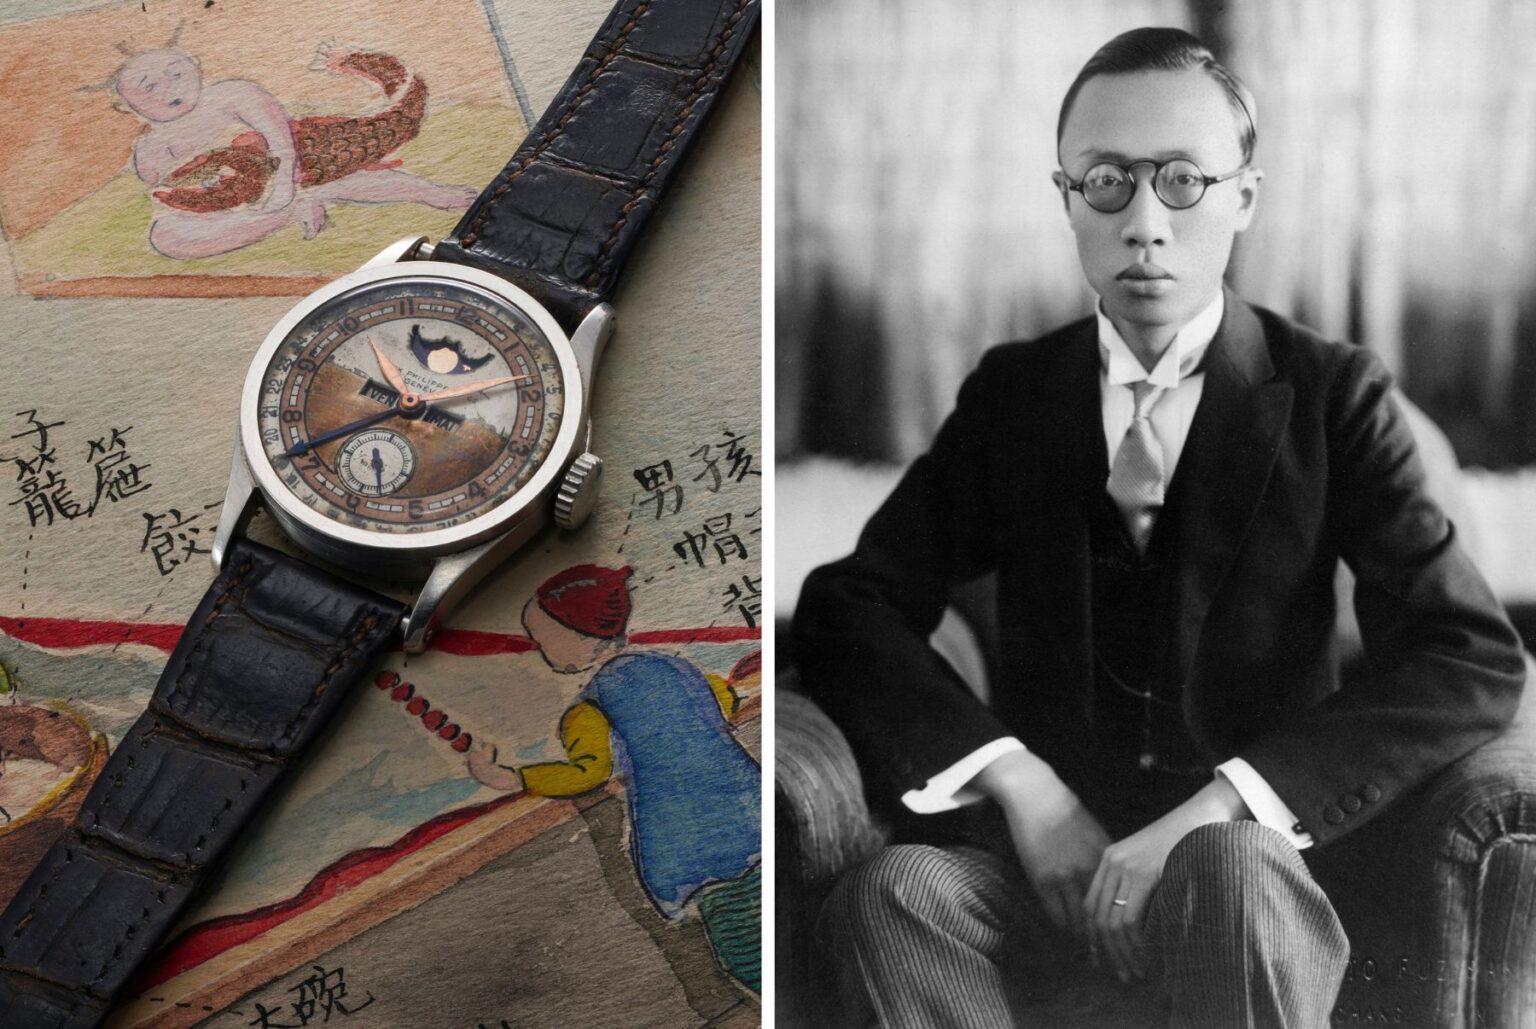 Watch of last emperor of china sells for HK$49 million in Hong Kong